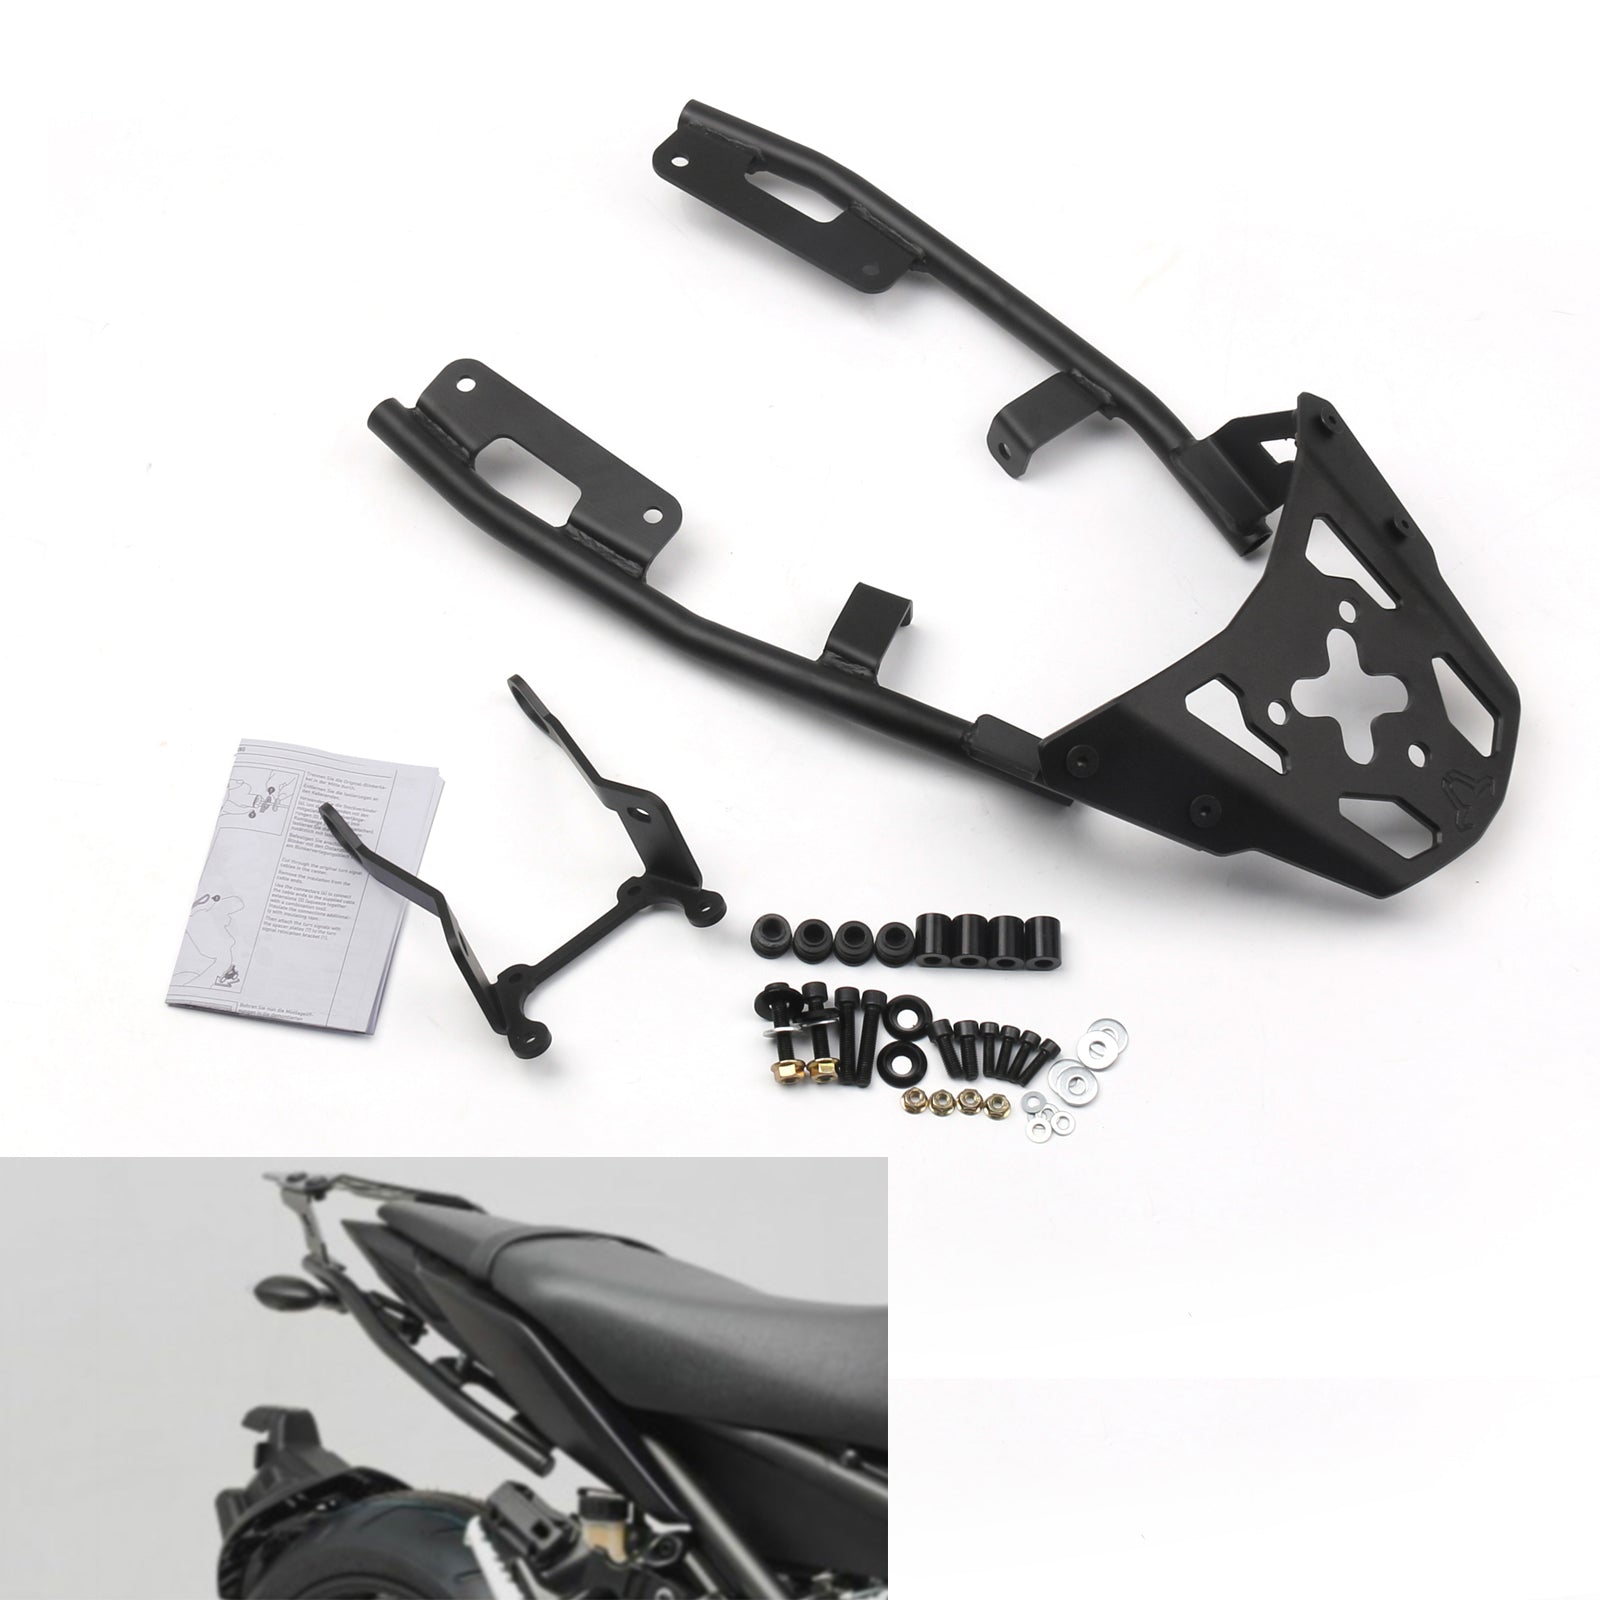 Luggage Rack Rear Carrier Plate kit For Yamaha MT-09 MT 09 2017